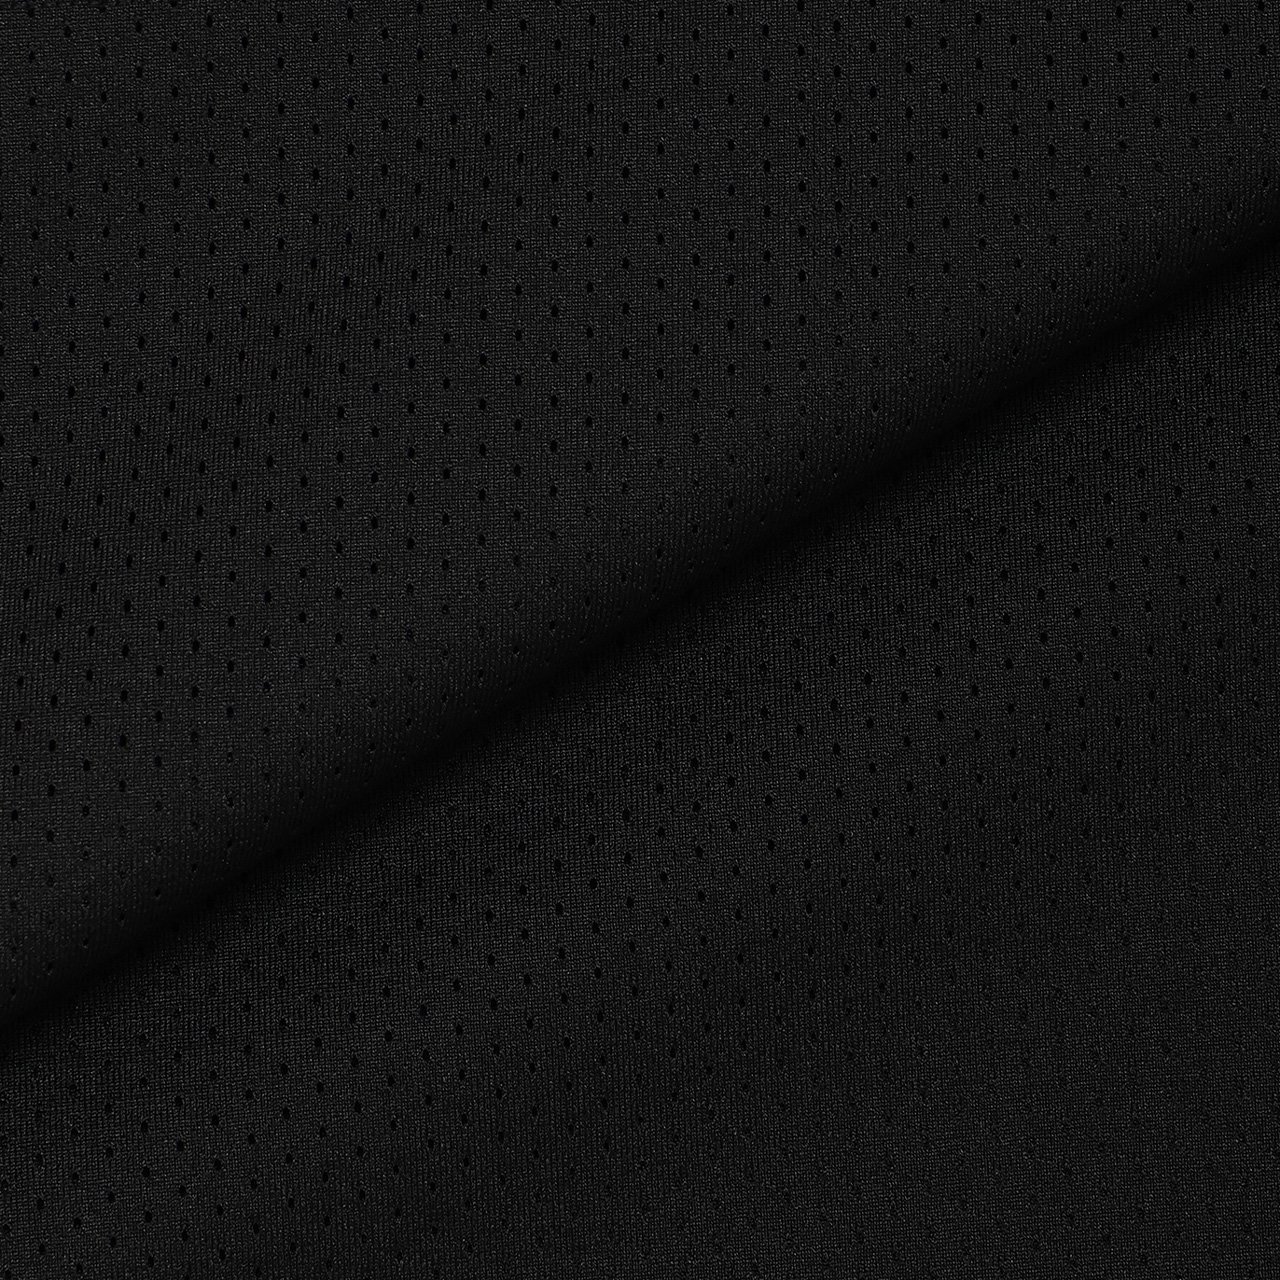 <img class='new_mark_img1' src='https://img.shop-pro.jp/img/new/icons5.gif' style='border:none;display:inline;margin:0px;padding:0px;width:auto;' />MLVINCE () | S/S FOOTBALL SHIRT BLACK